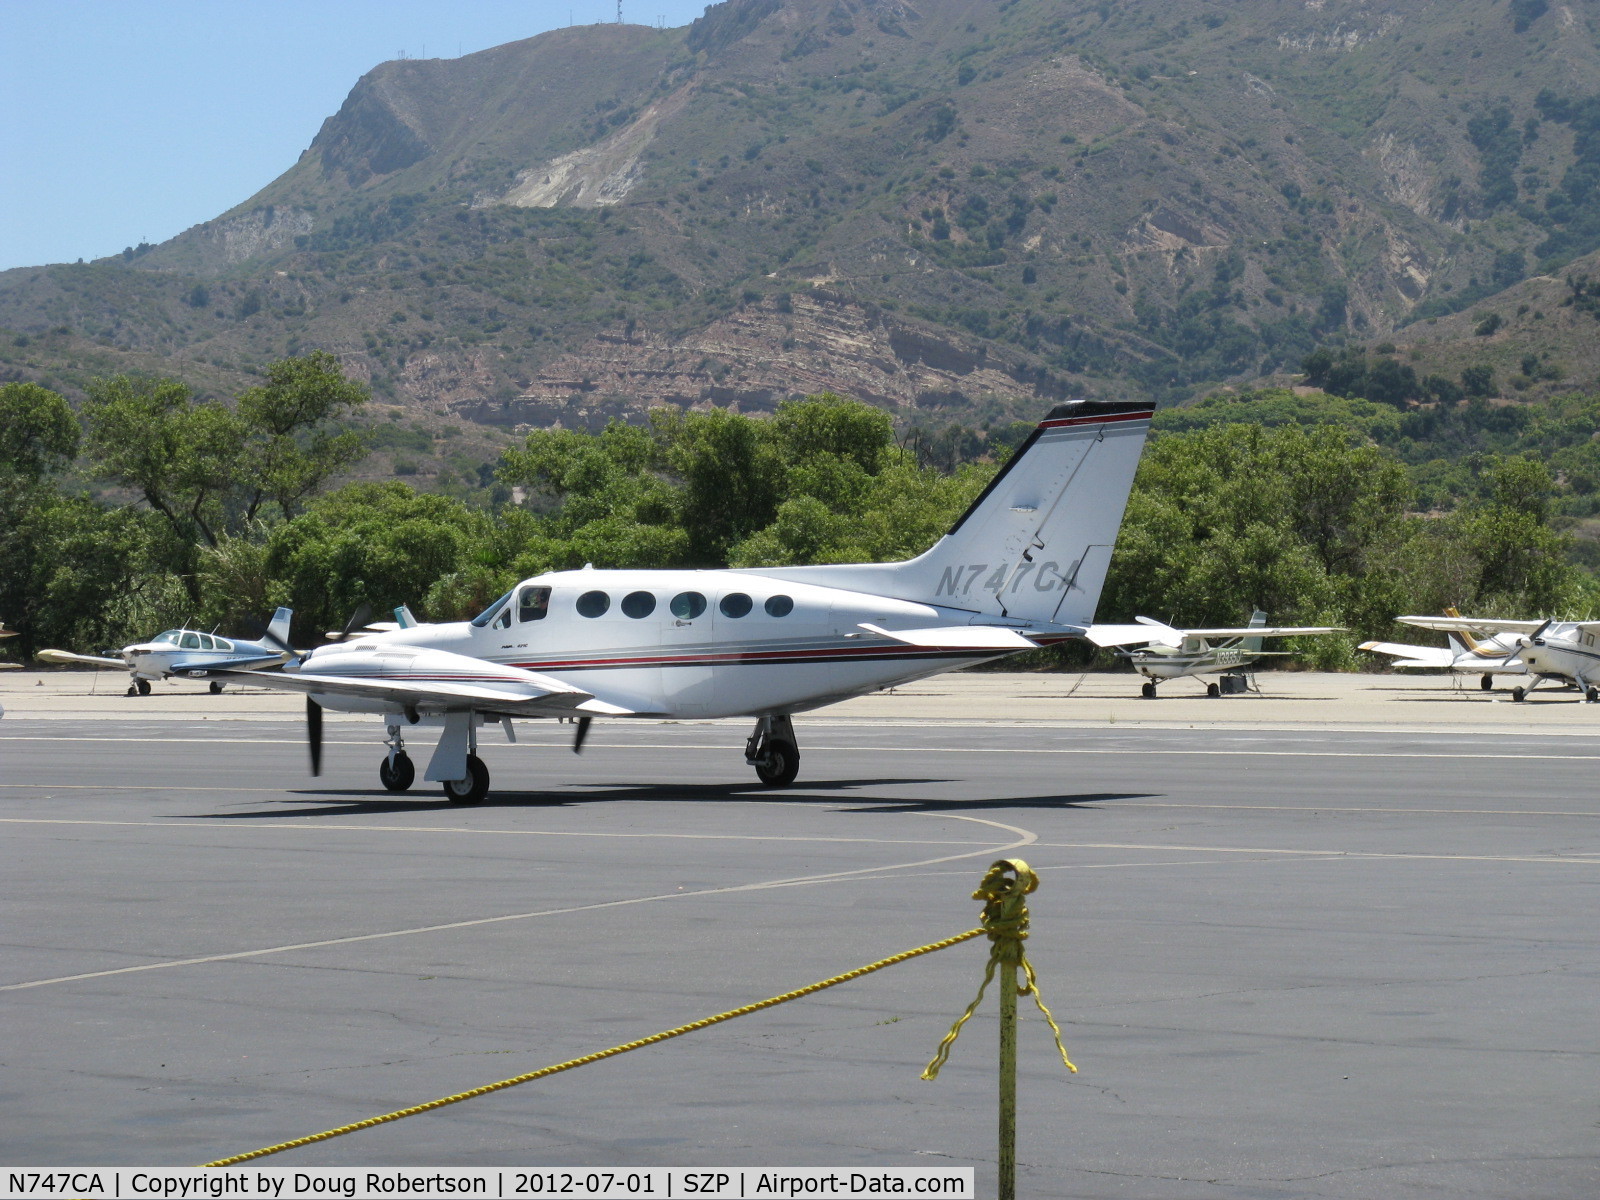 N747CA, Cessna 421C Golden Eagle C/N 421C0850, 1980 Cessna 421C GOLDEN EAGLE, Continental GTSIO-520-L & -N turbosupercharged counter-rotating geared engine upgrade conversion by RAM Aircraft LP, 375 Hp each, Pressurized, wet wings, taxi after landing Rwy 22